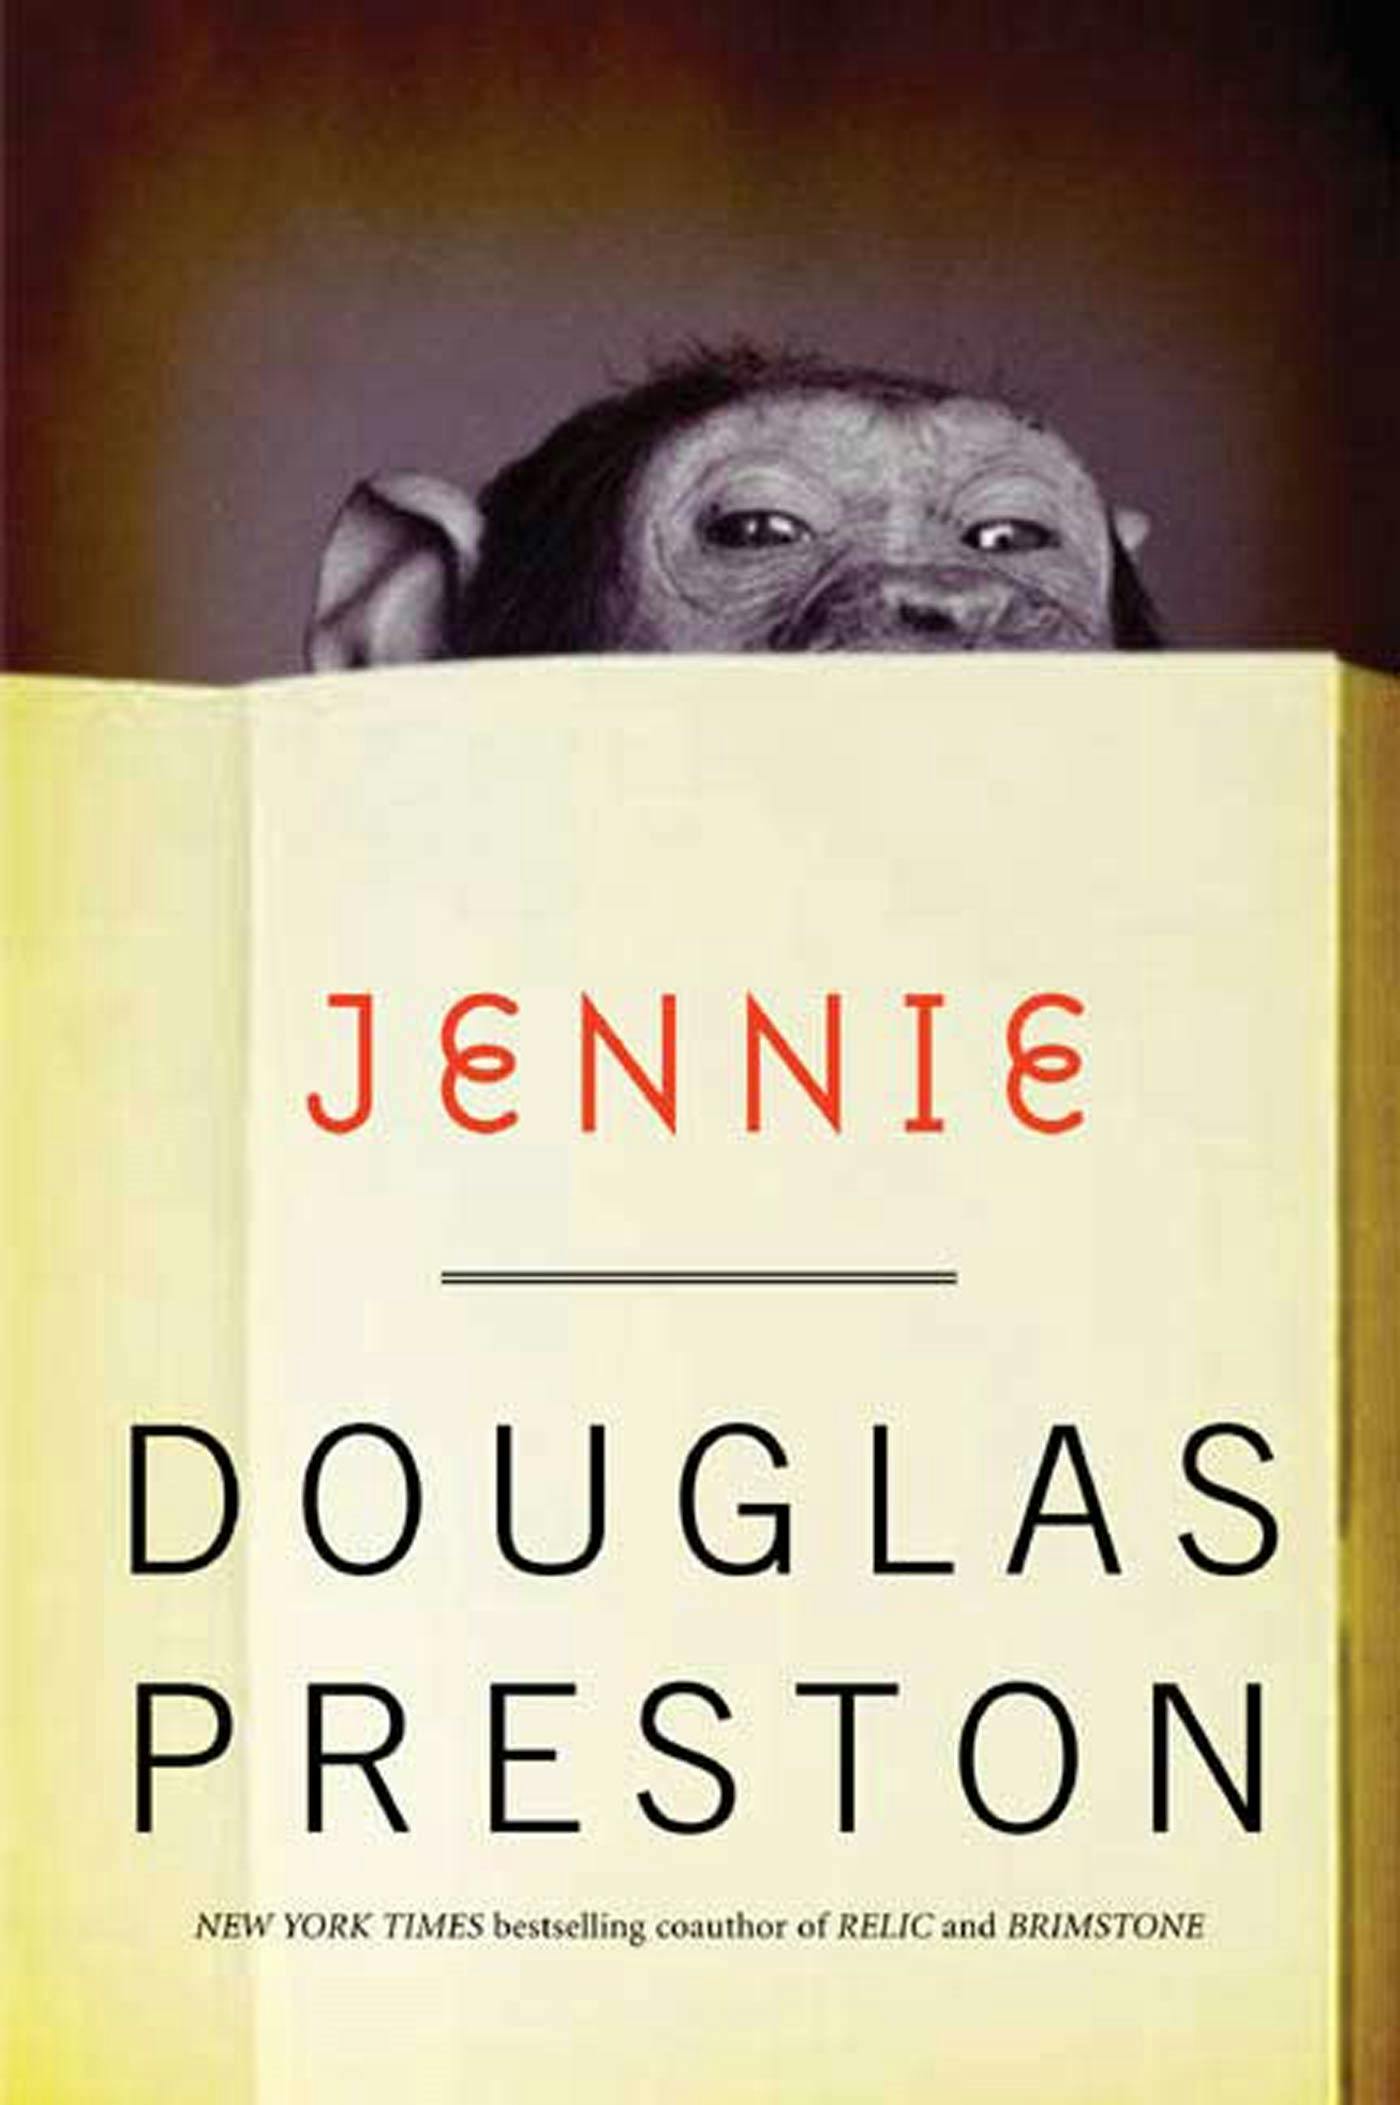 Cover for the book titled as: Jennie